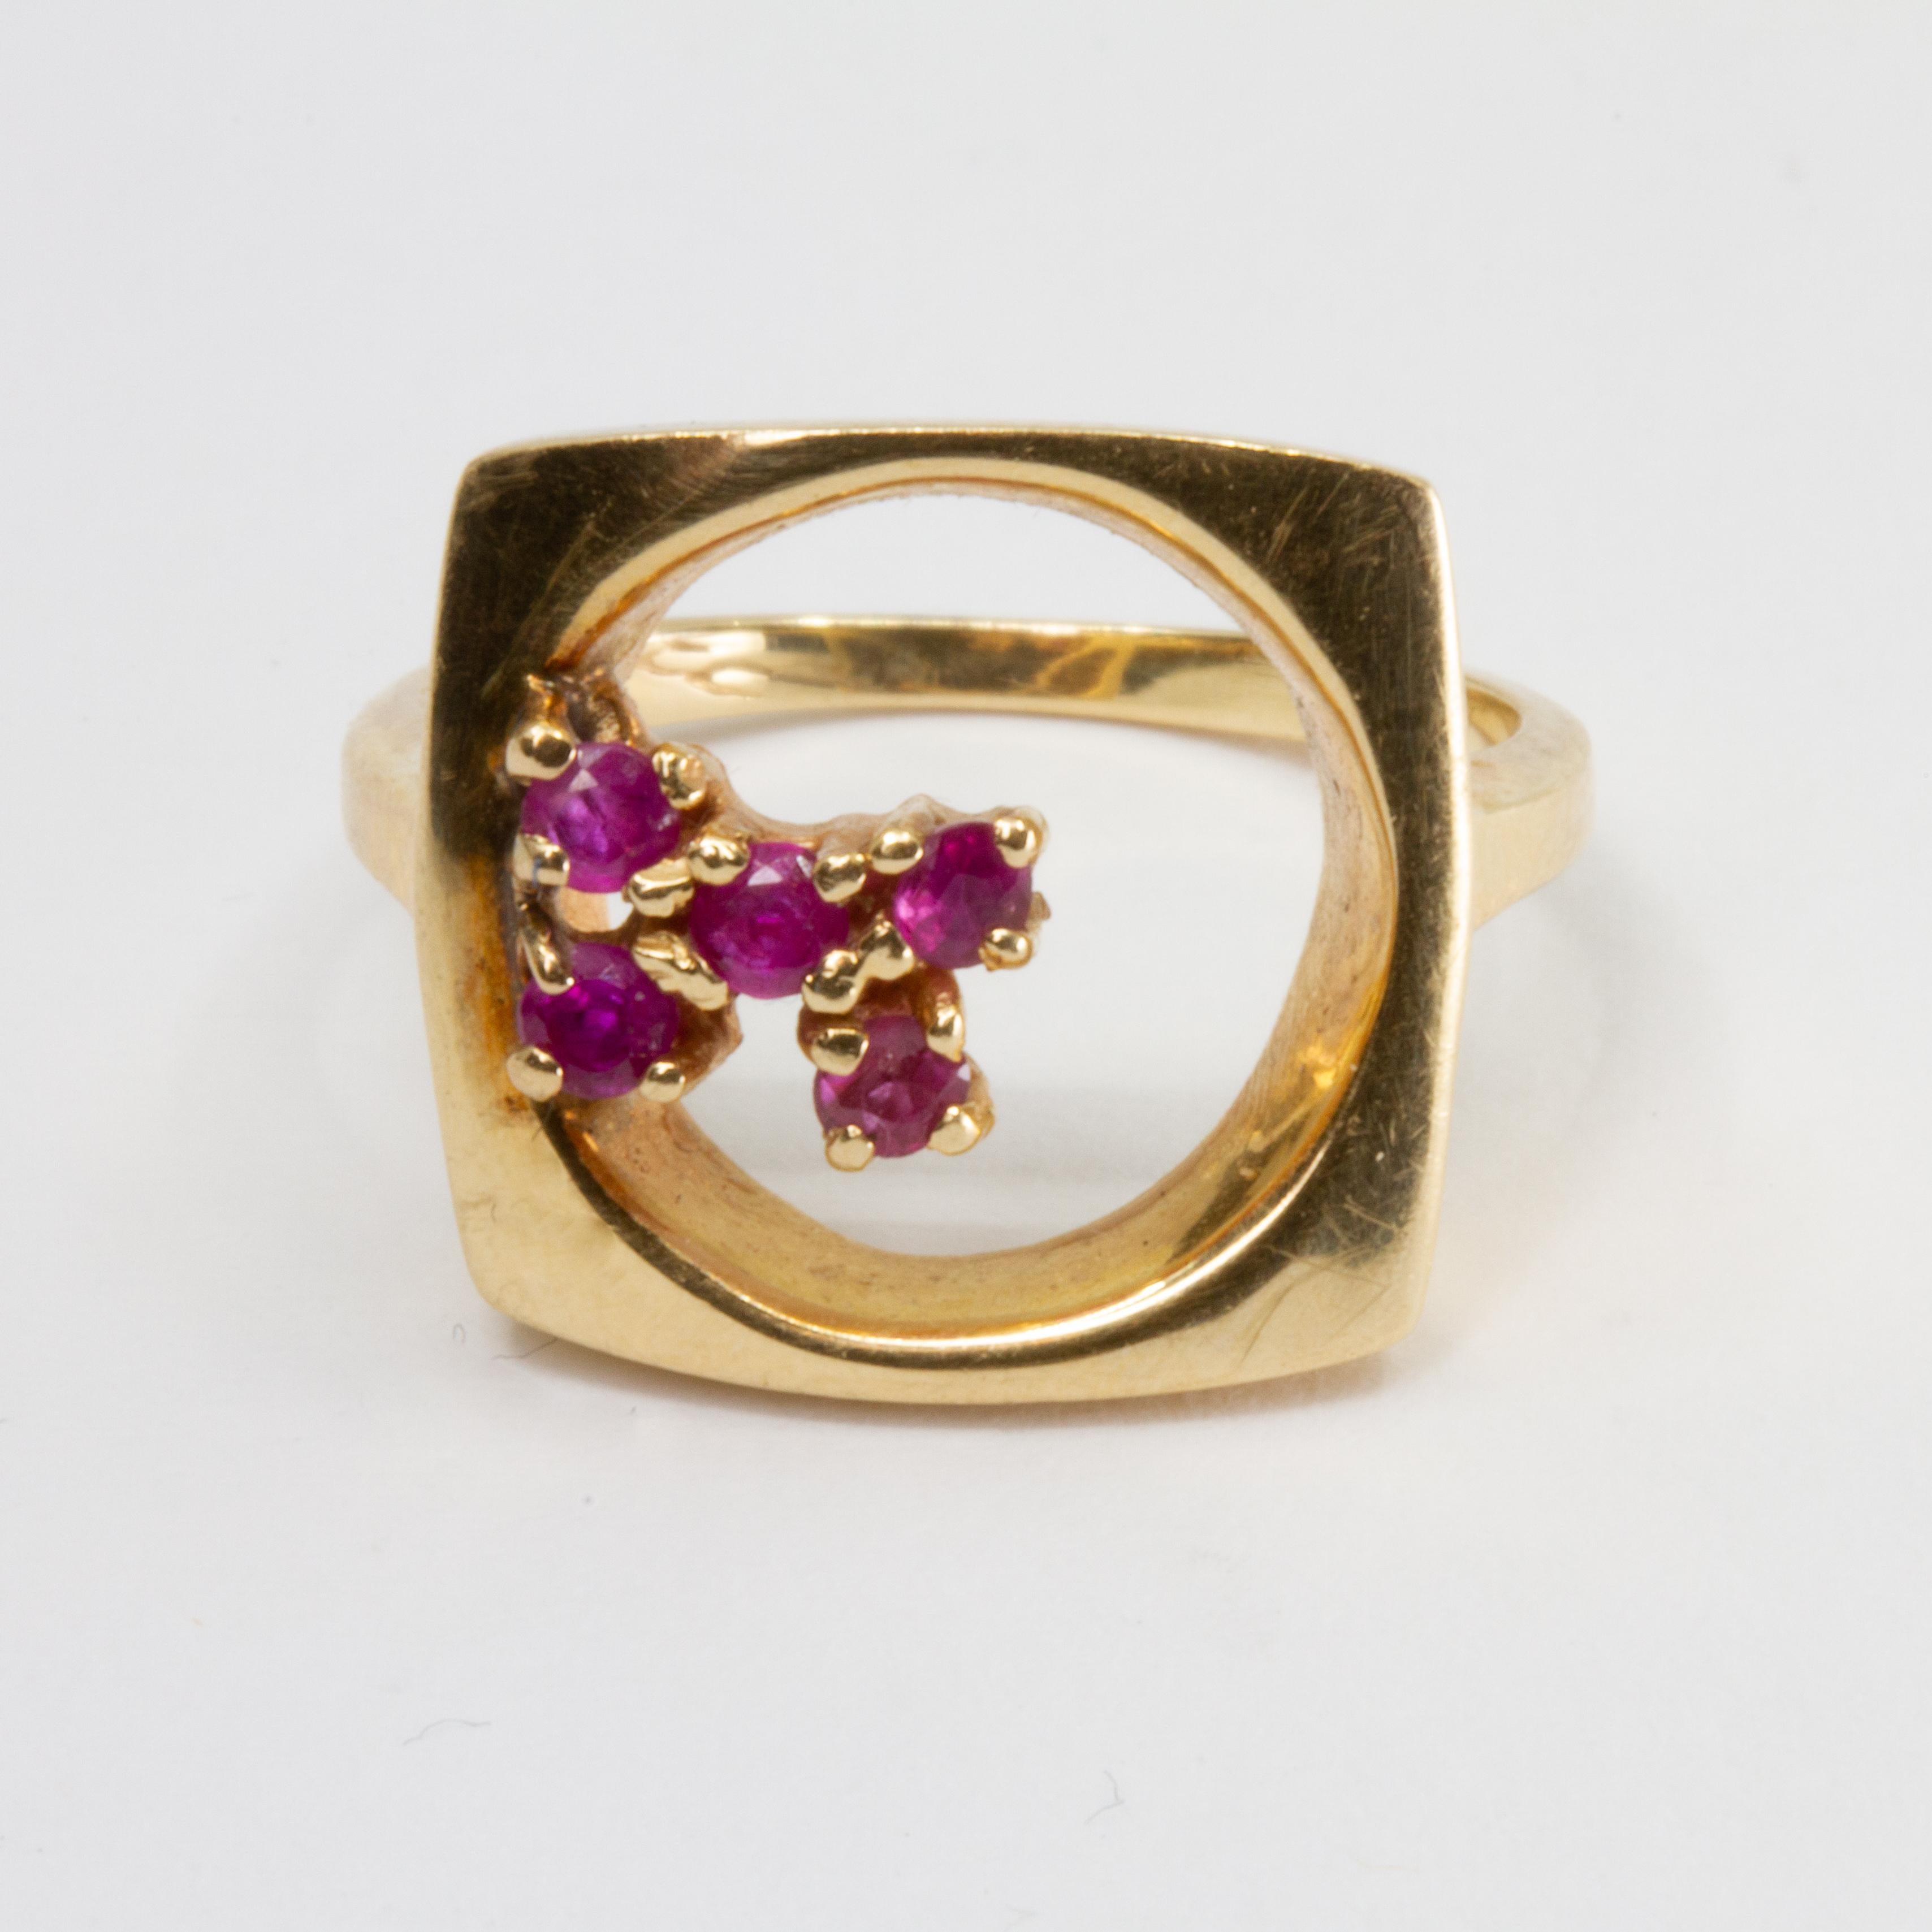 14k gold and ruby modernist mid century design ring s4.5 3dwt. This item is accompanied by a GIA appraisers letter from a well respected independent firm that has been in business for over 75 years.